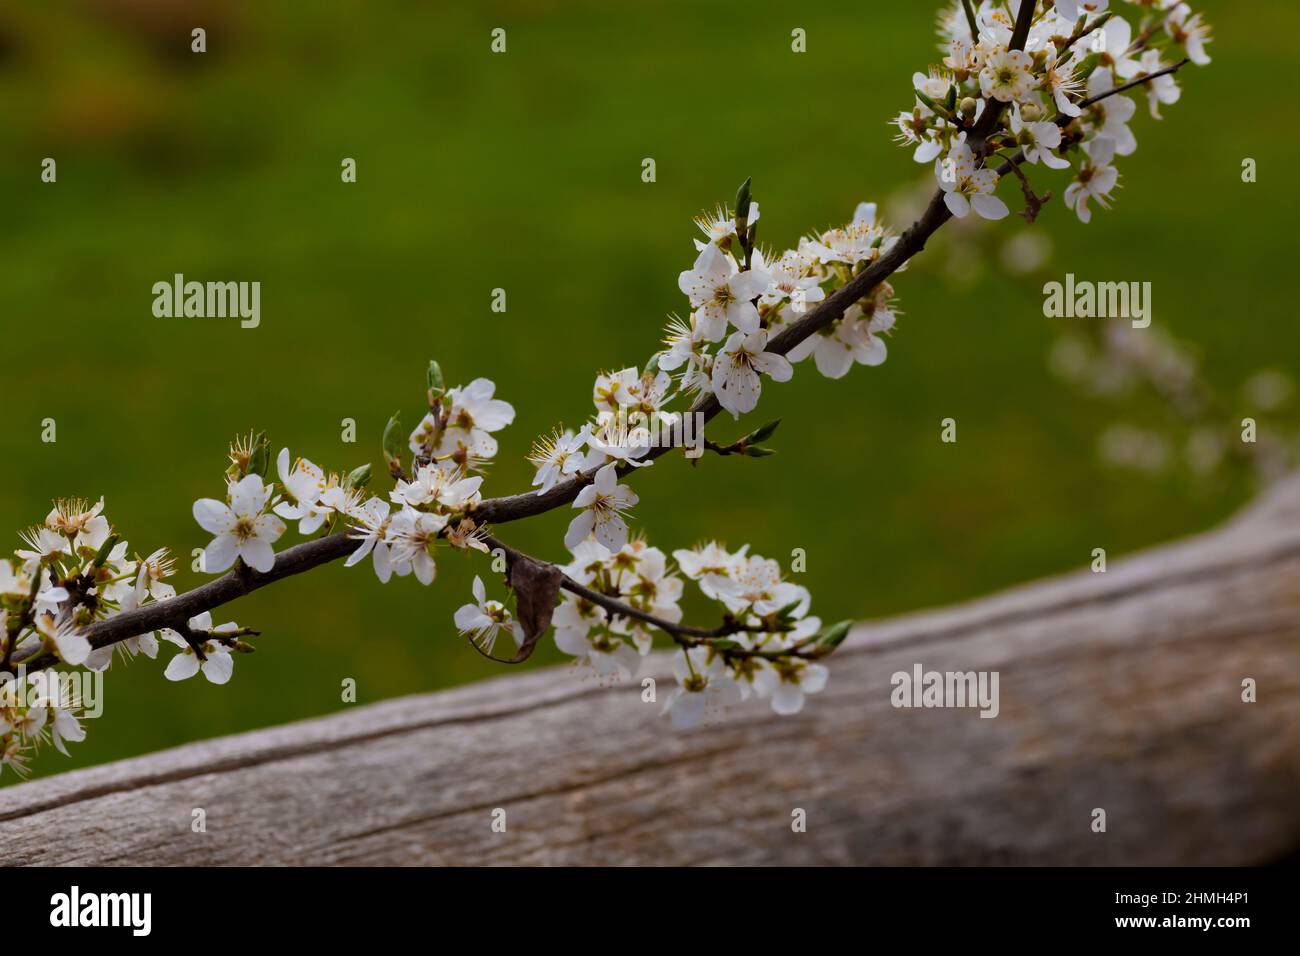 Bloomed on a branch of a plum tree in spring, shallow depth of field Stock Photo